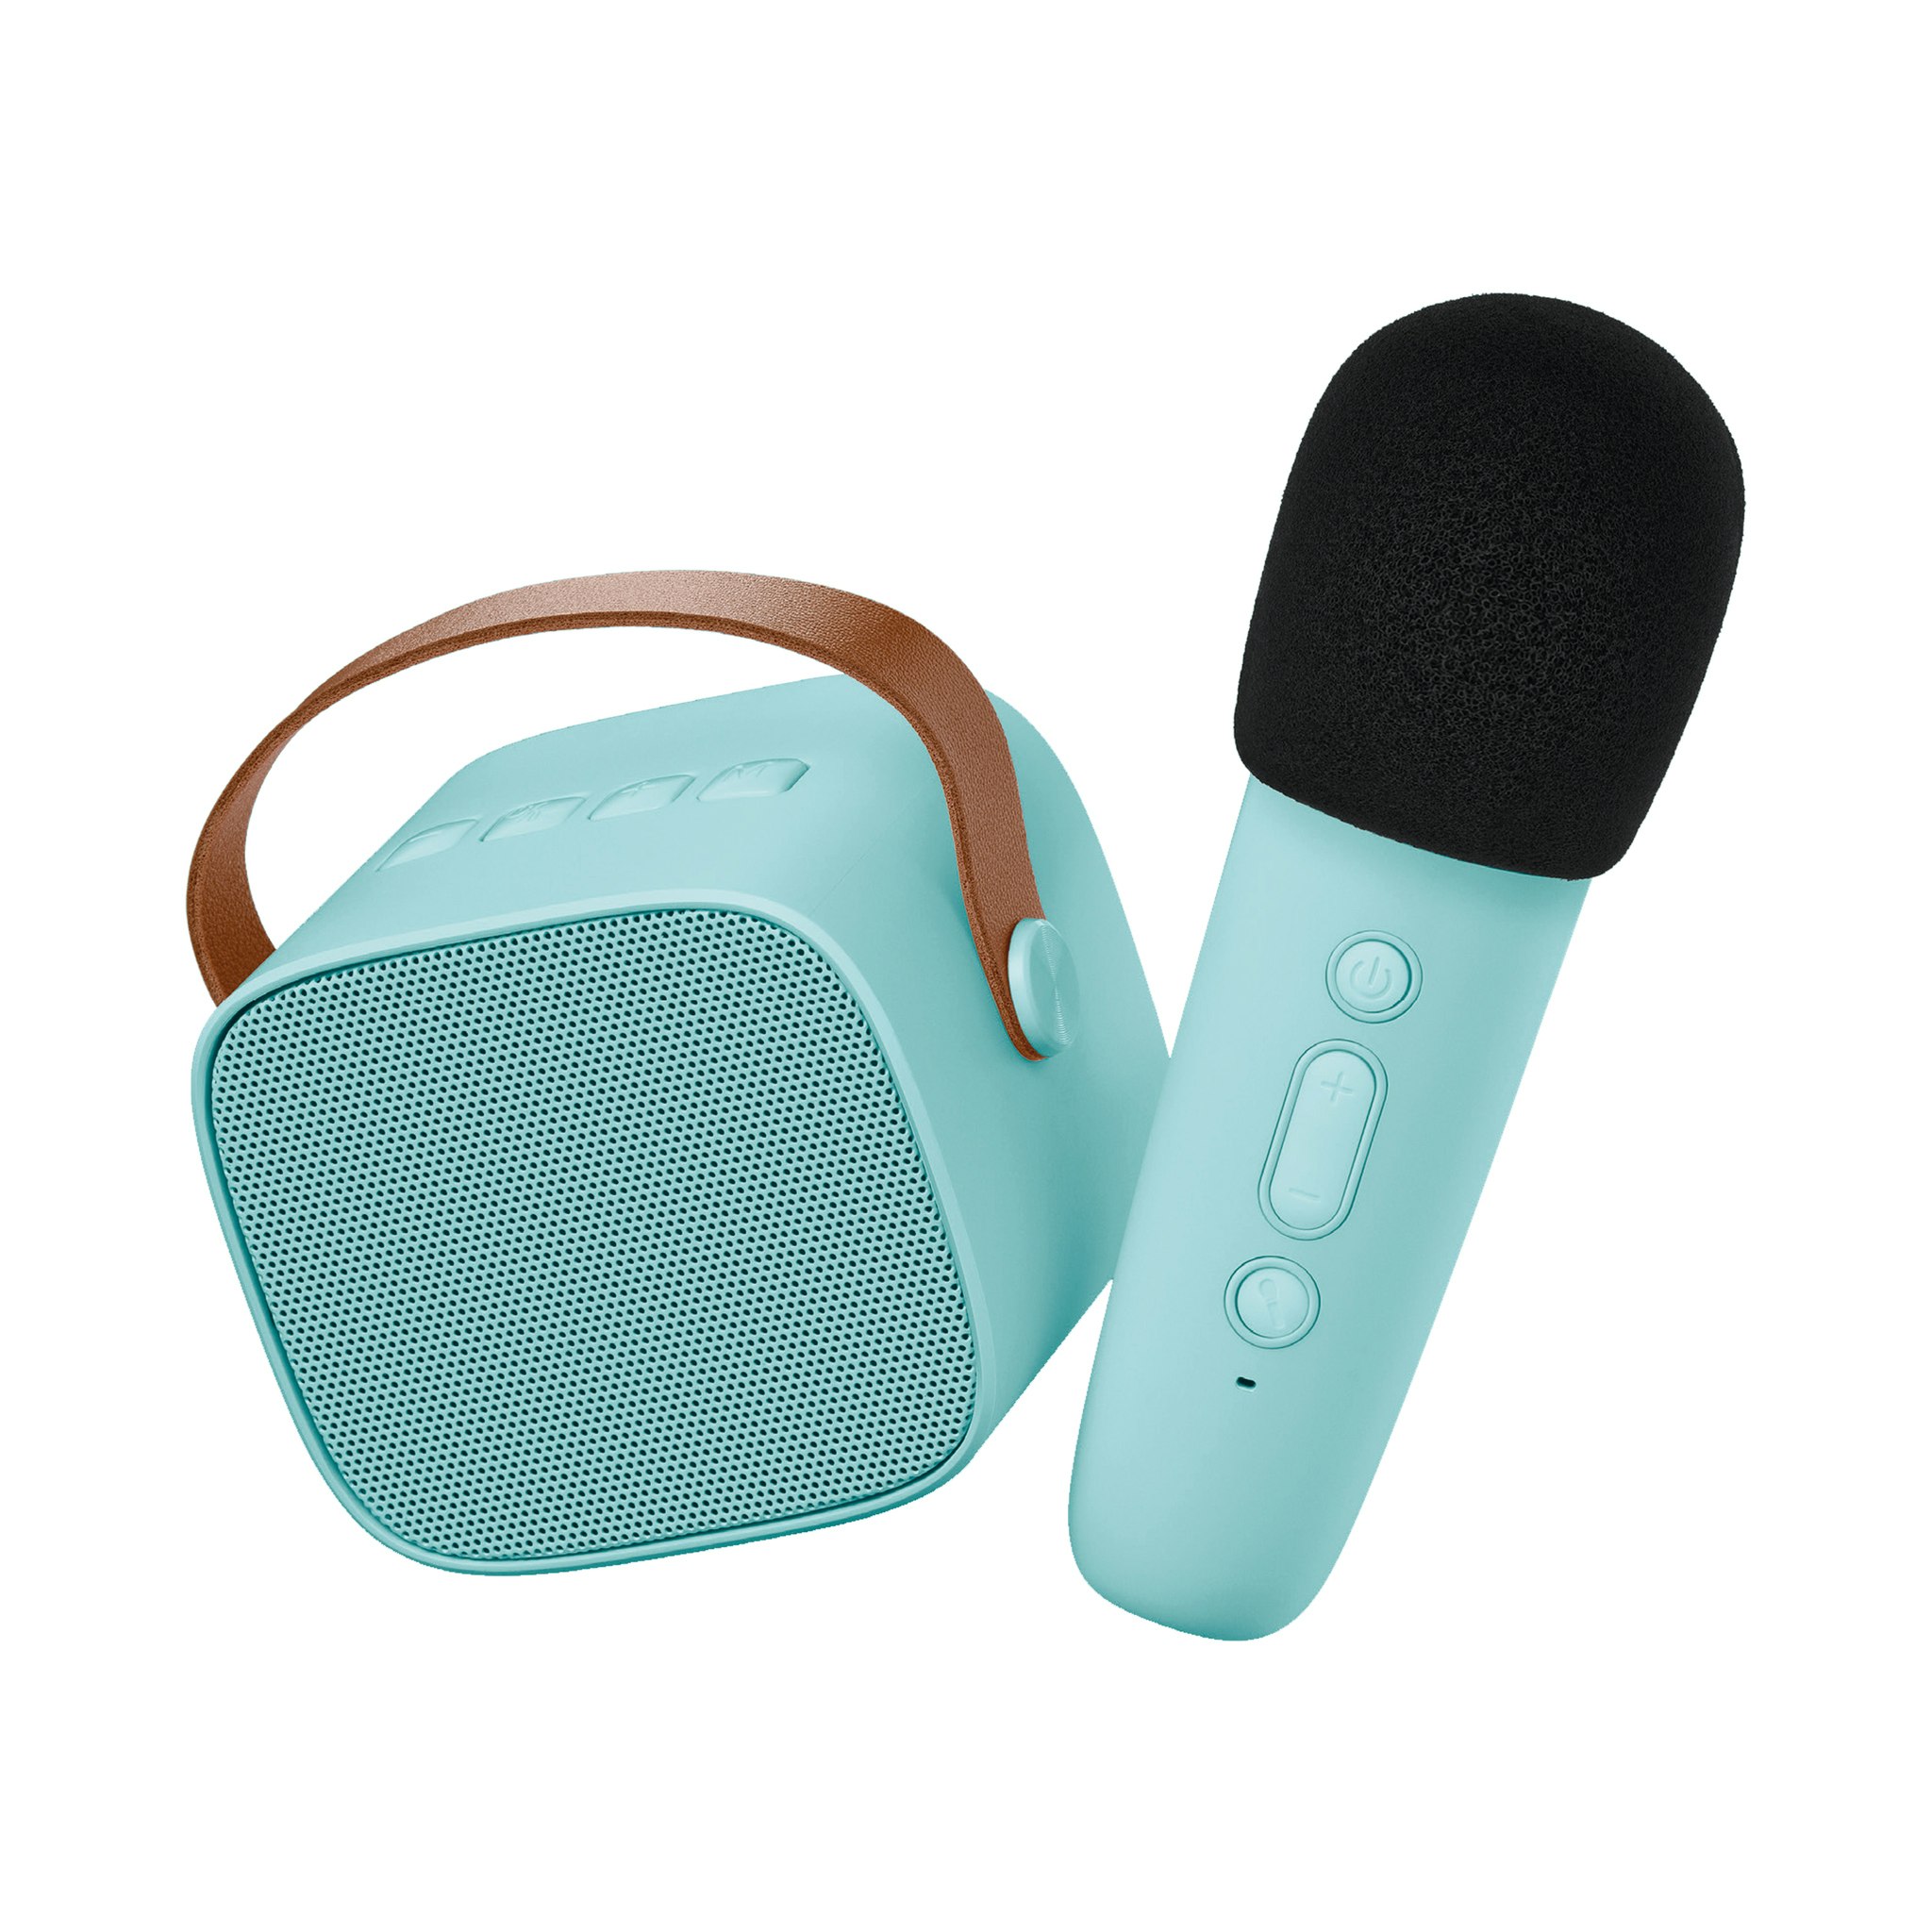 Lalarma- Bluetooth Speaker With Wireless Microphone - Blue